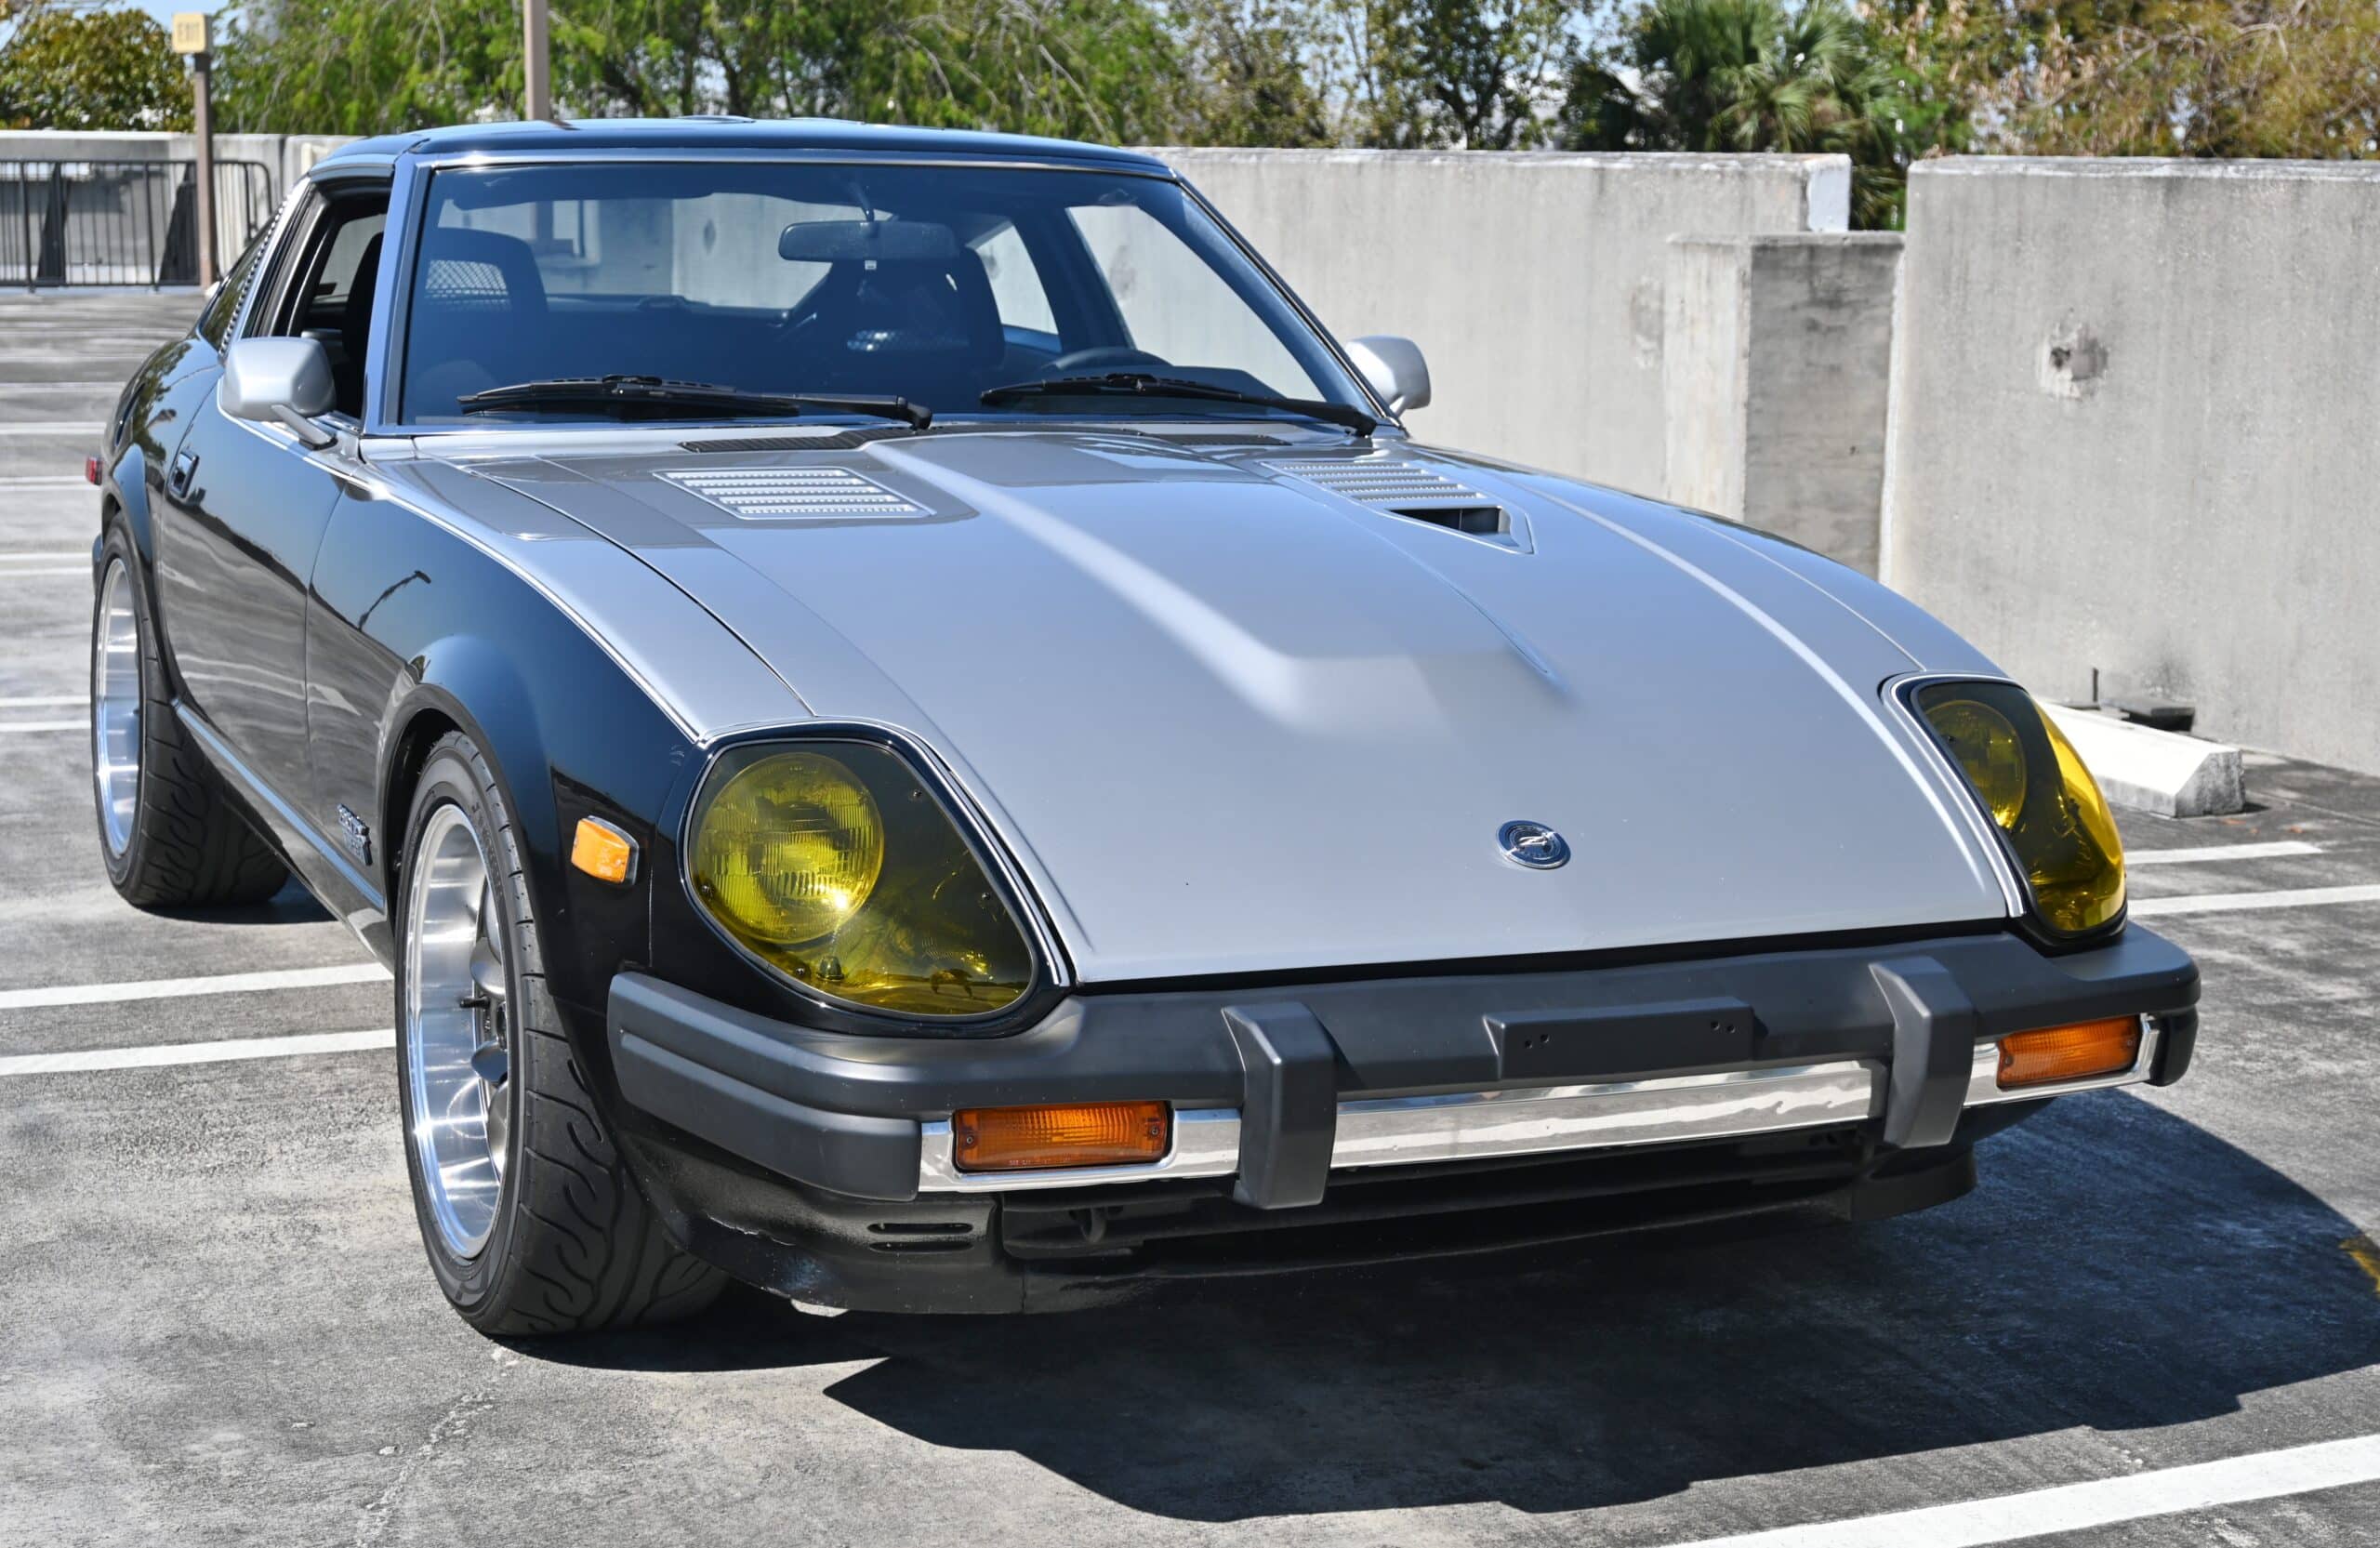 1981 Datsun Z-Series 280ZX Turbo 1 of 3 in this color combo- 52k Miles – Recaro Seats – T Tops – Service Records